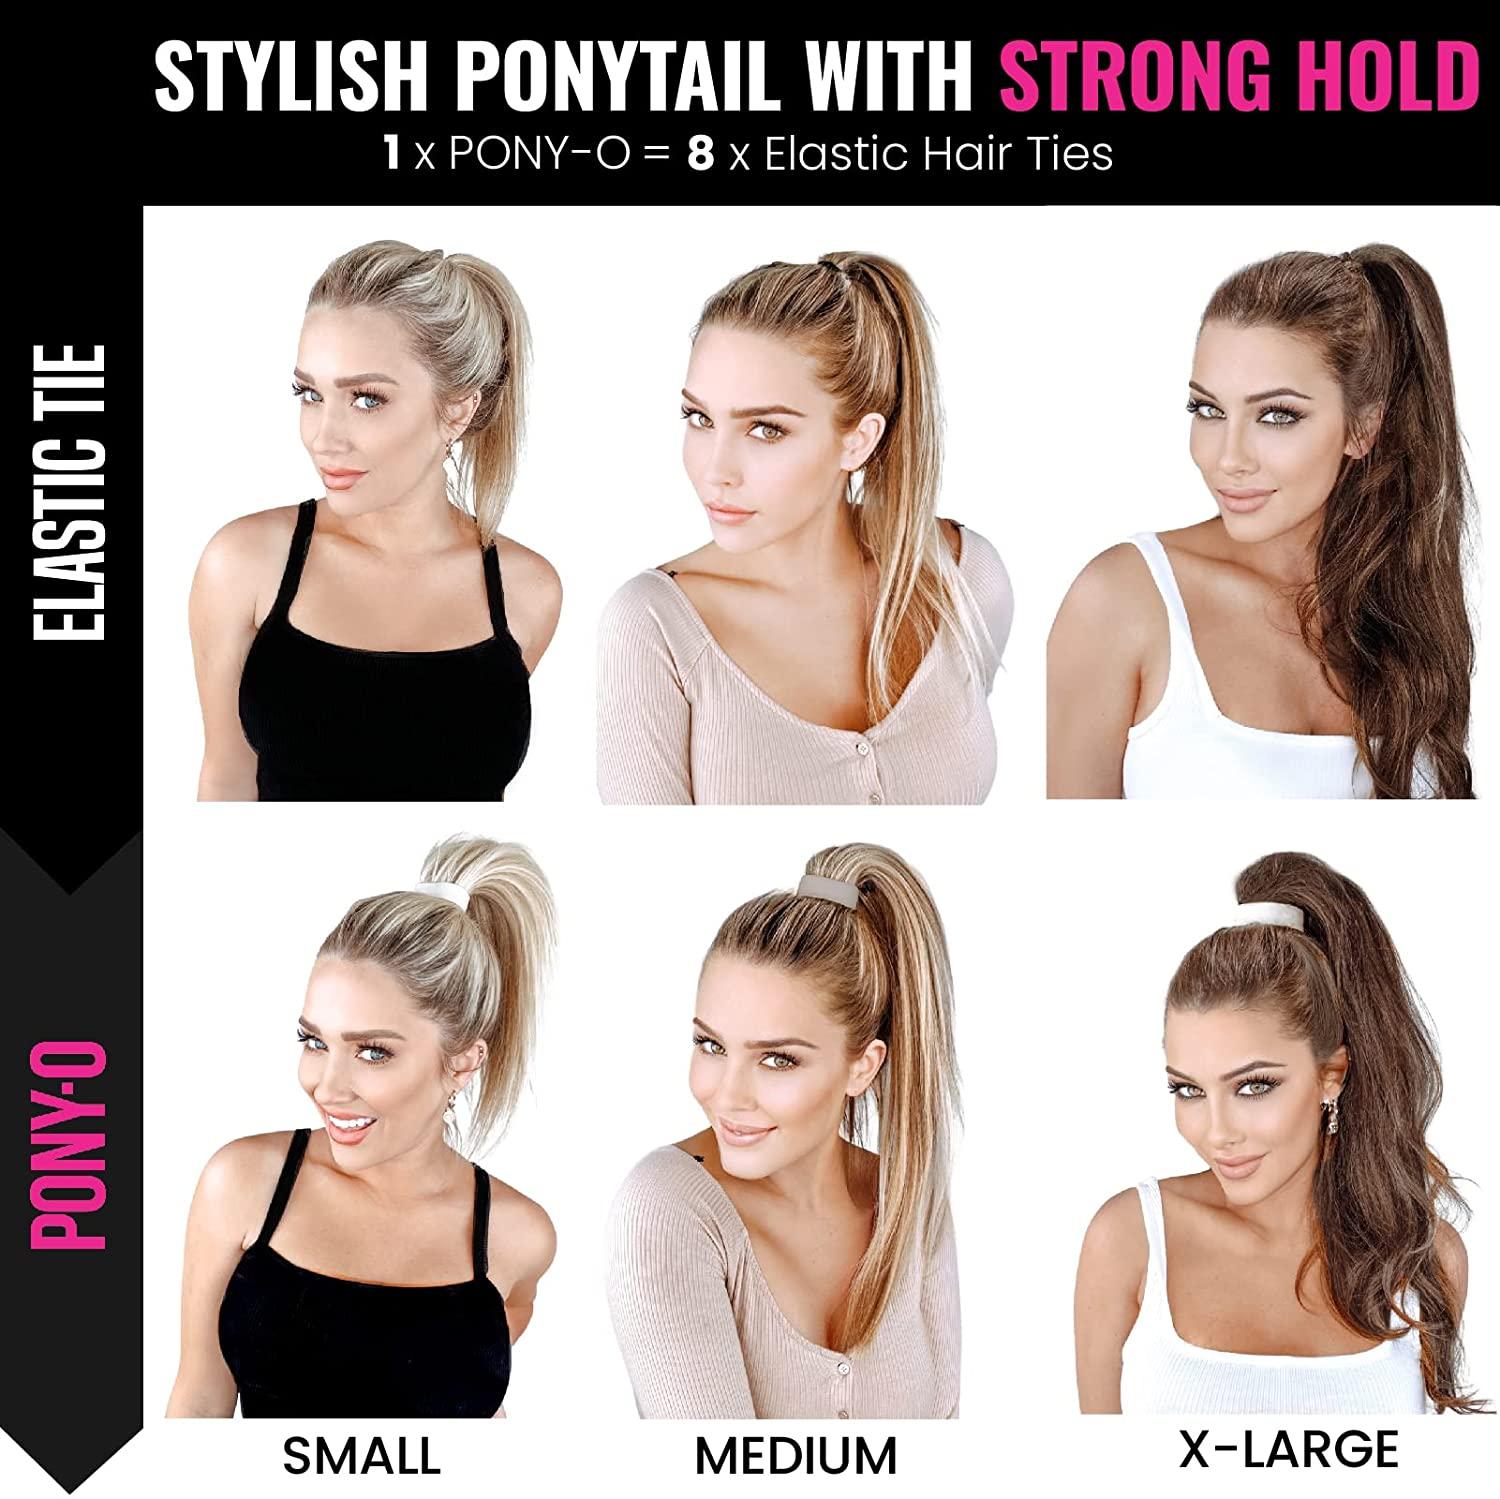  PONY-O 4 Pack Original Hair Tie Alternative - Revolutionary  Ponytail Holder Hair Accessories for Women - Medium Size PONY-O for Normal  Hair - Brown and Black : Beauty & Personal Care